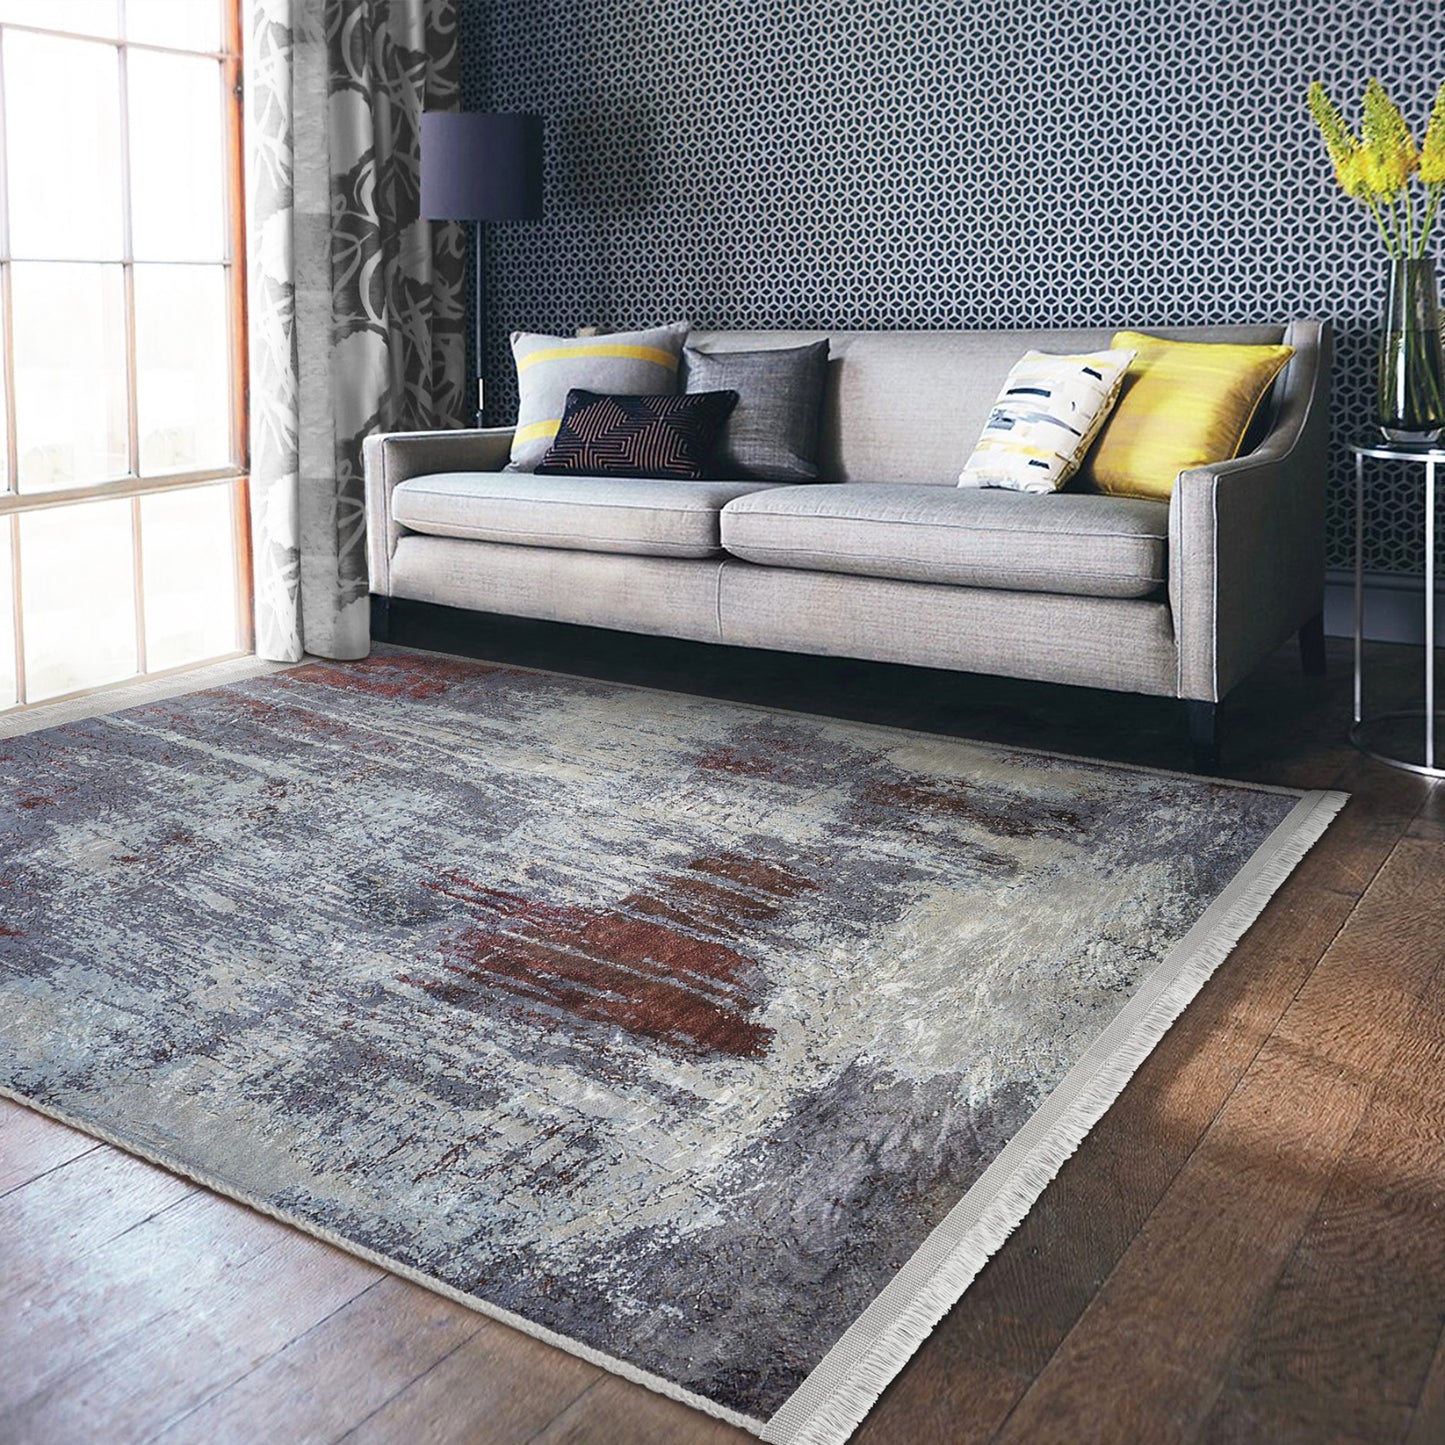 Functional Rug with Natural Rustic Appeal